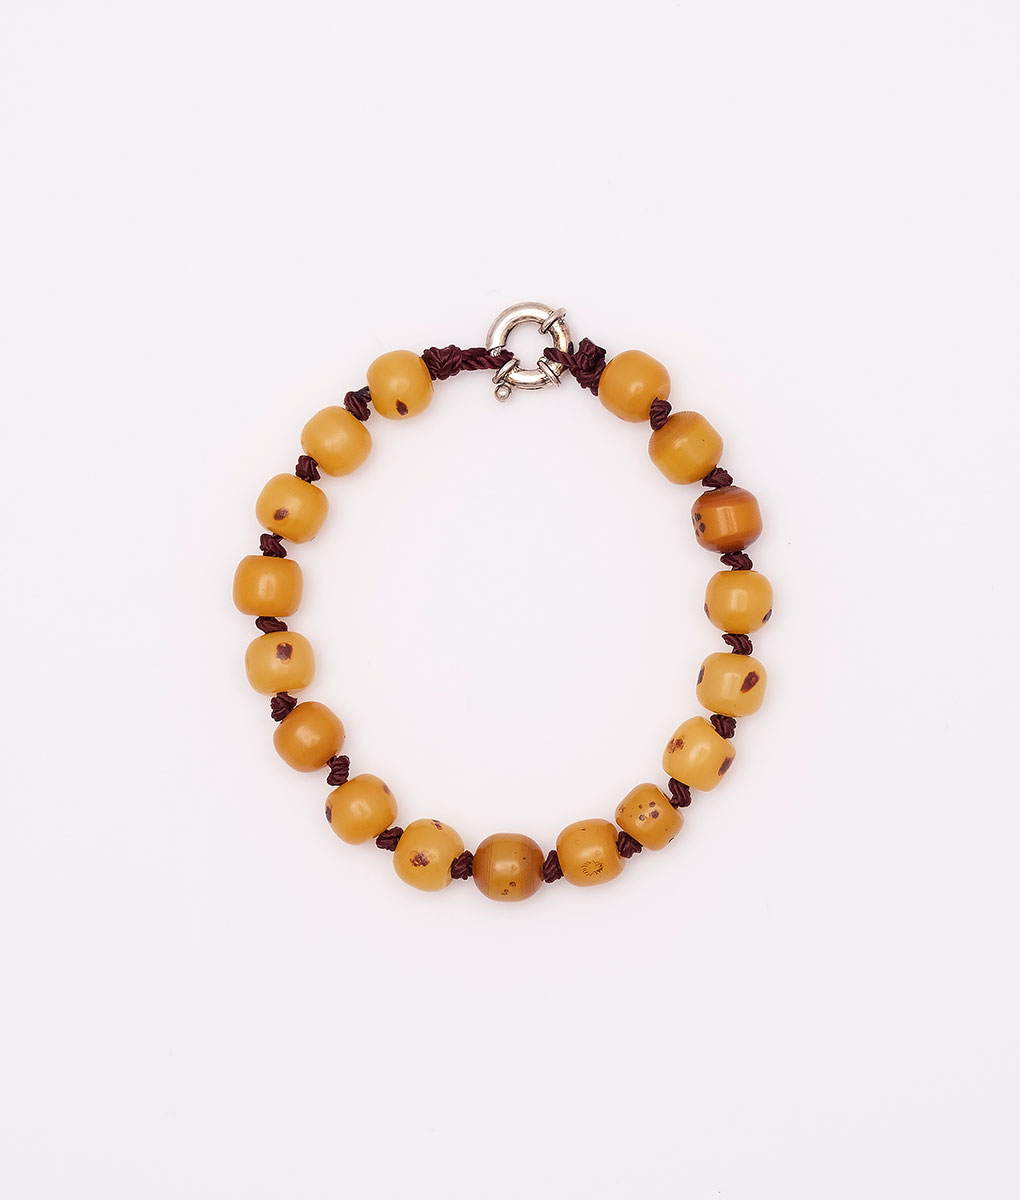 Bracelet made of Mastic-Amber, old mixture of amber and bakelite (1930-1950) and silver